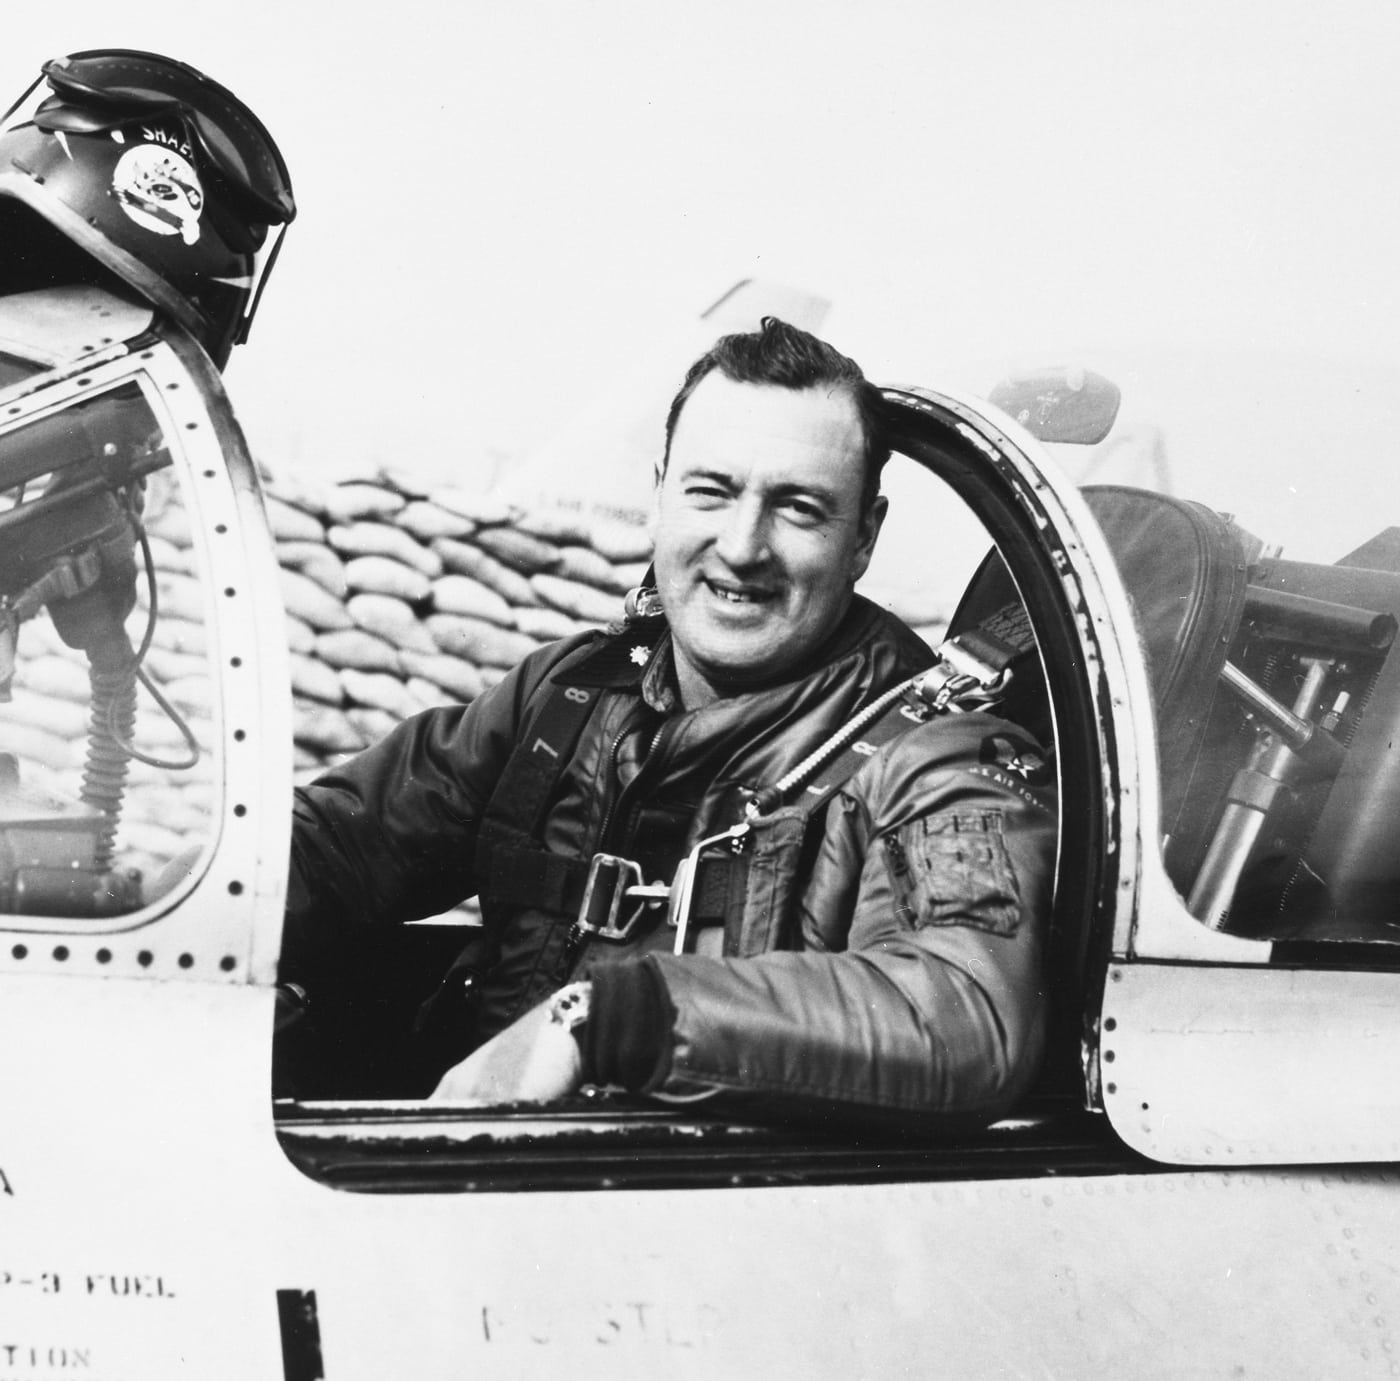 In this photo, Maj William Shaeffer, a Korean War pilot, smiles at the camera while sitting in the cockpit of his F-86 plane. 